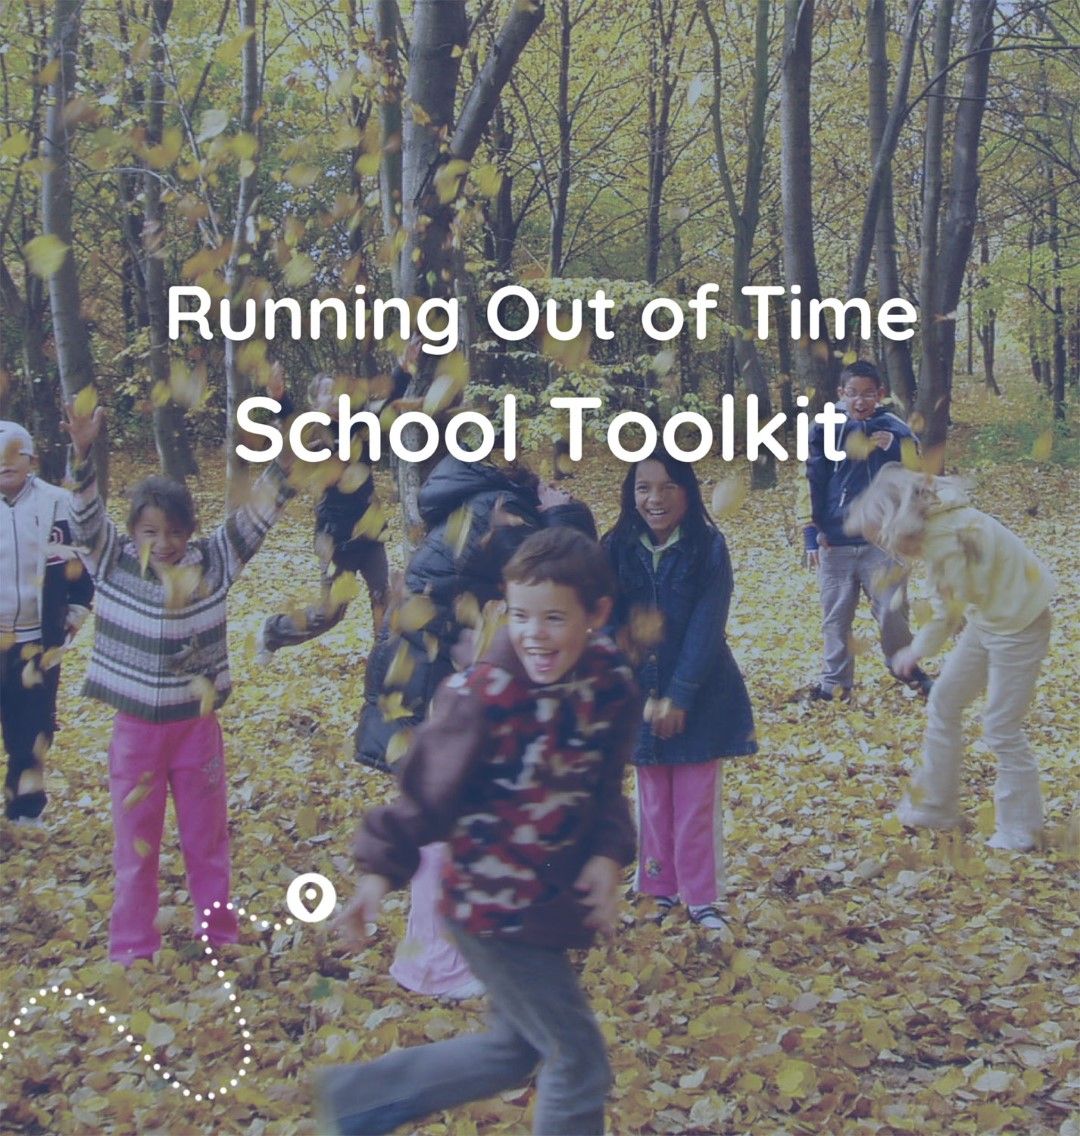 Running Out of Time - Ημέρα Δράσης των Σχολείων (Global Schools Action Day)